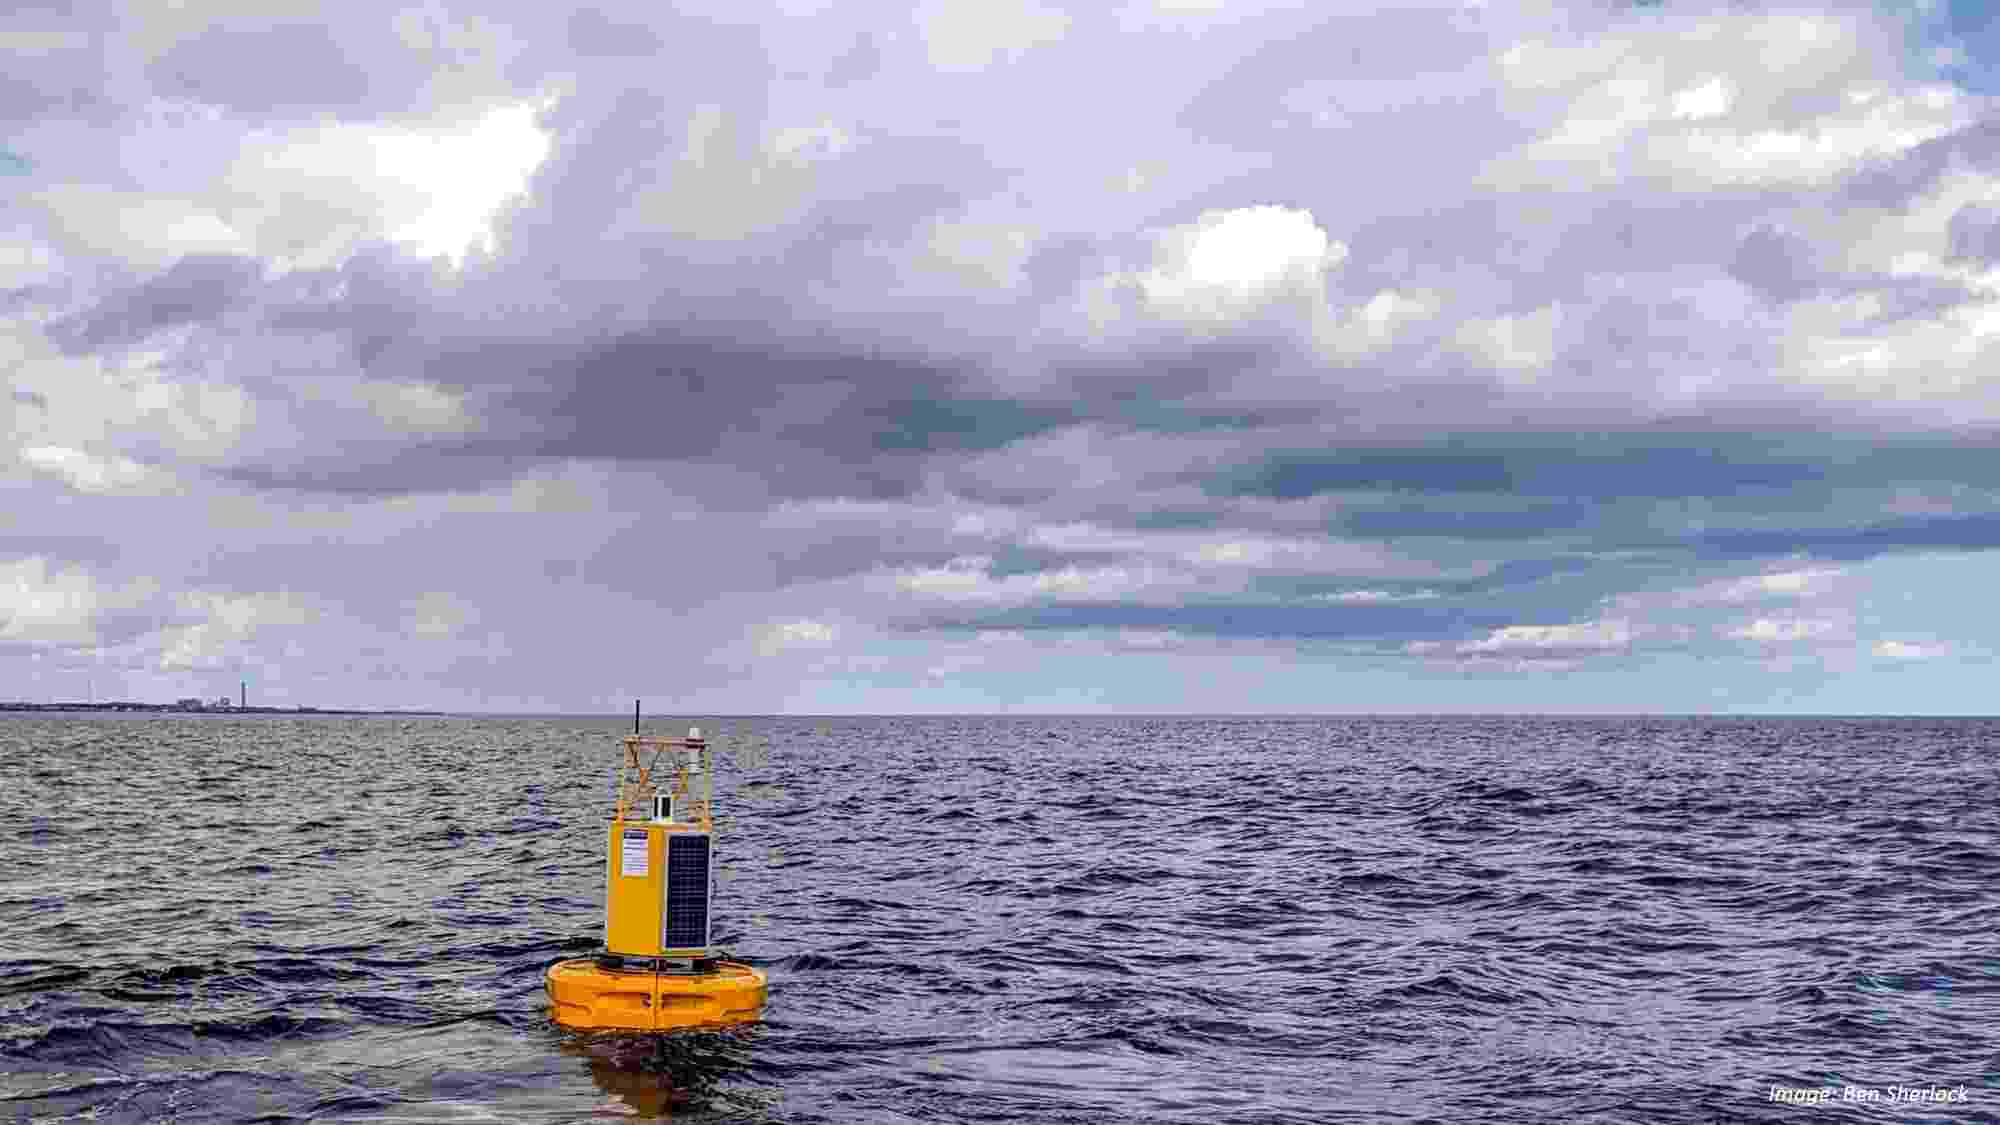 A photograph of a calm sea on a cloudy bay, with a large bright yellow marker buoy in the foreground.